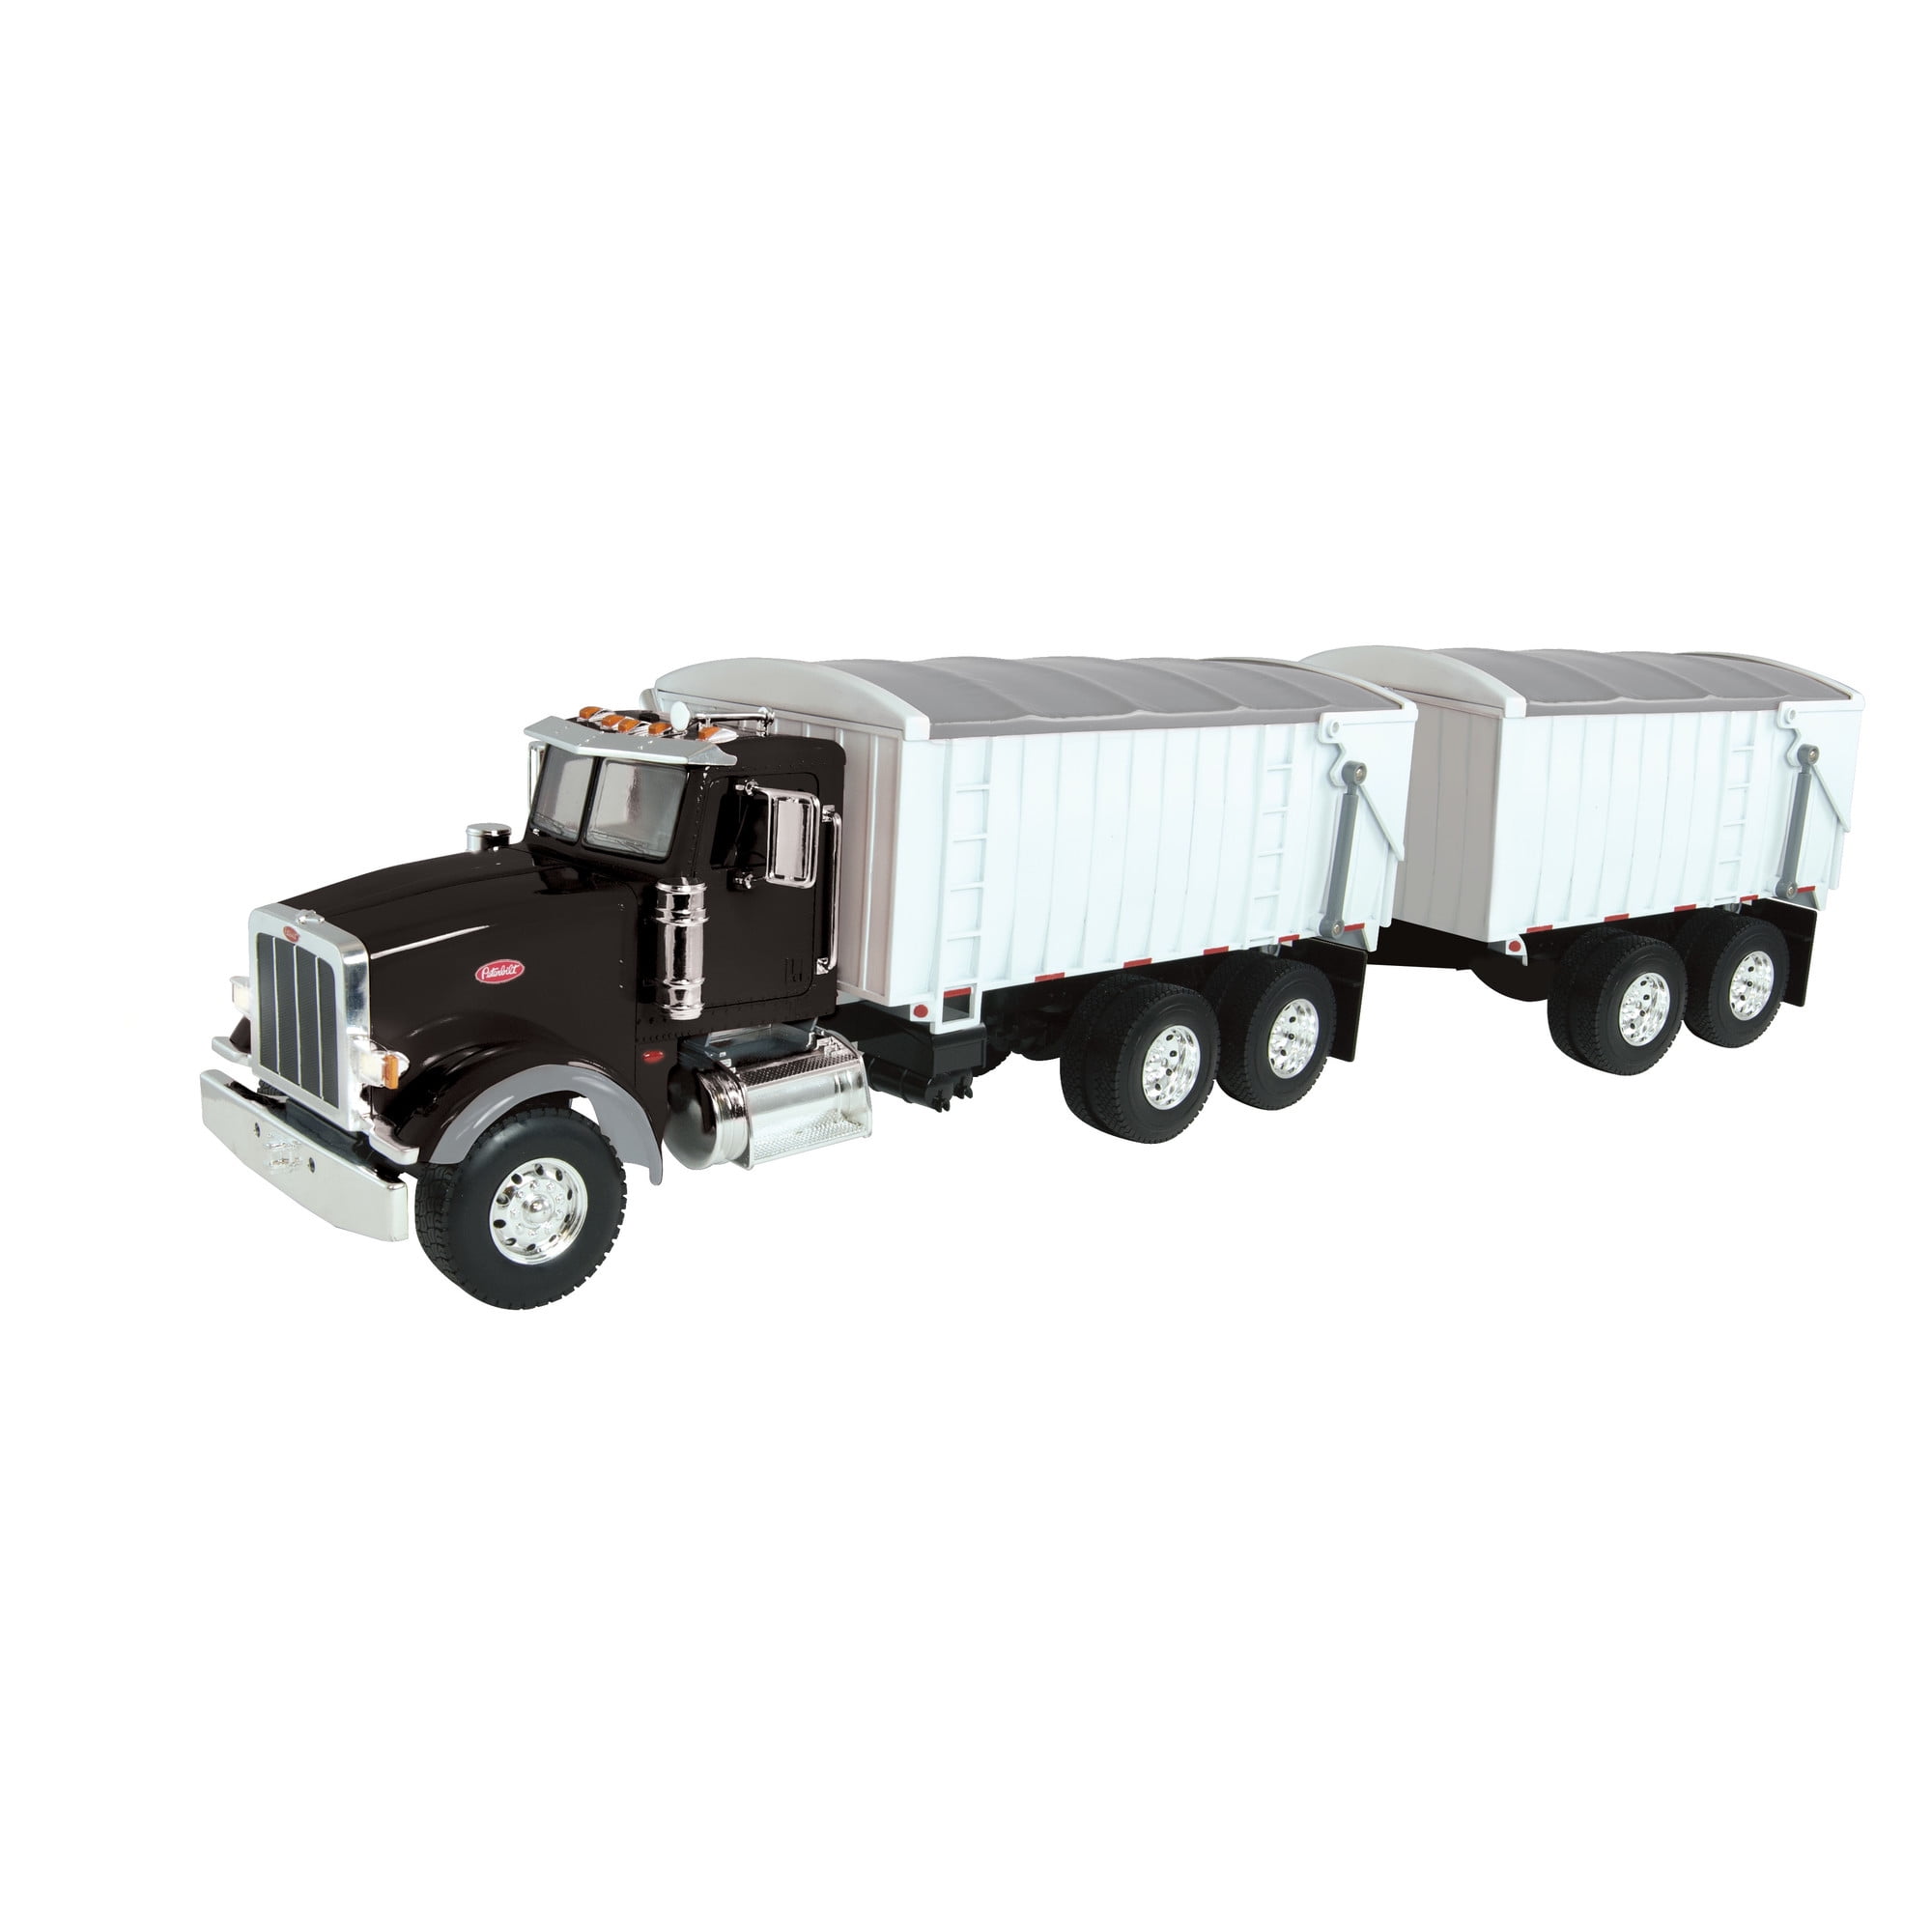 Details about   FORMULA SHELL TANKER TRUCK AND TRAILER DOUBLES AS A BANK LARGE DIECAST 